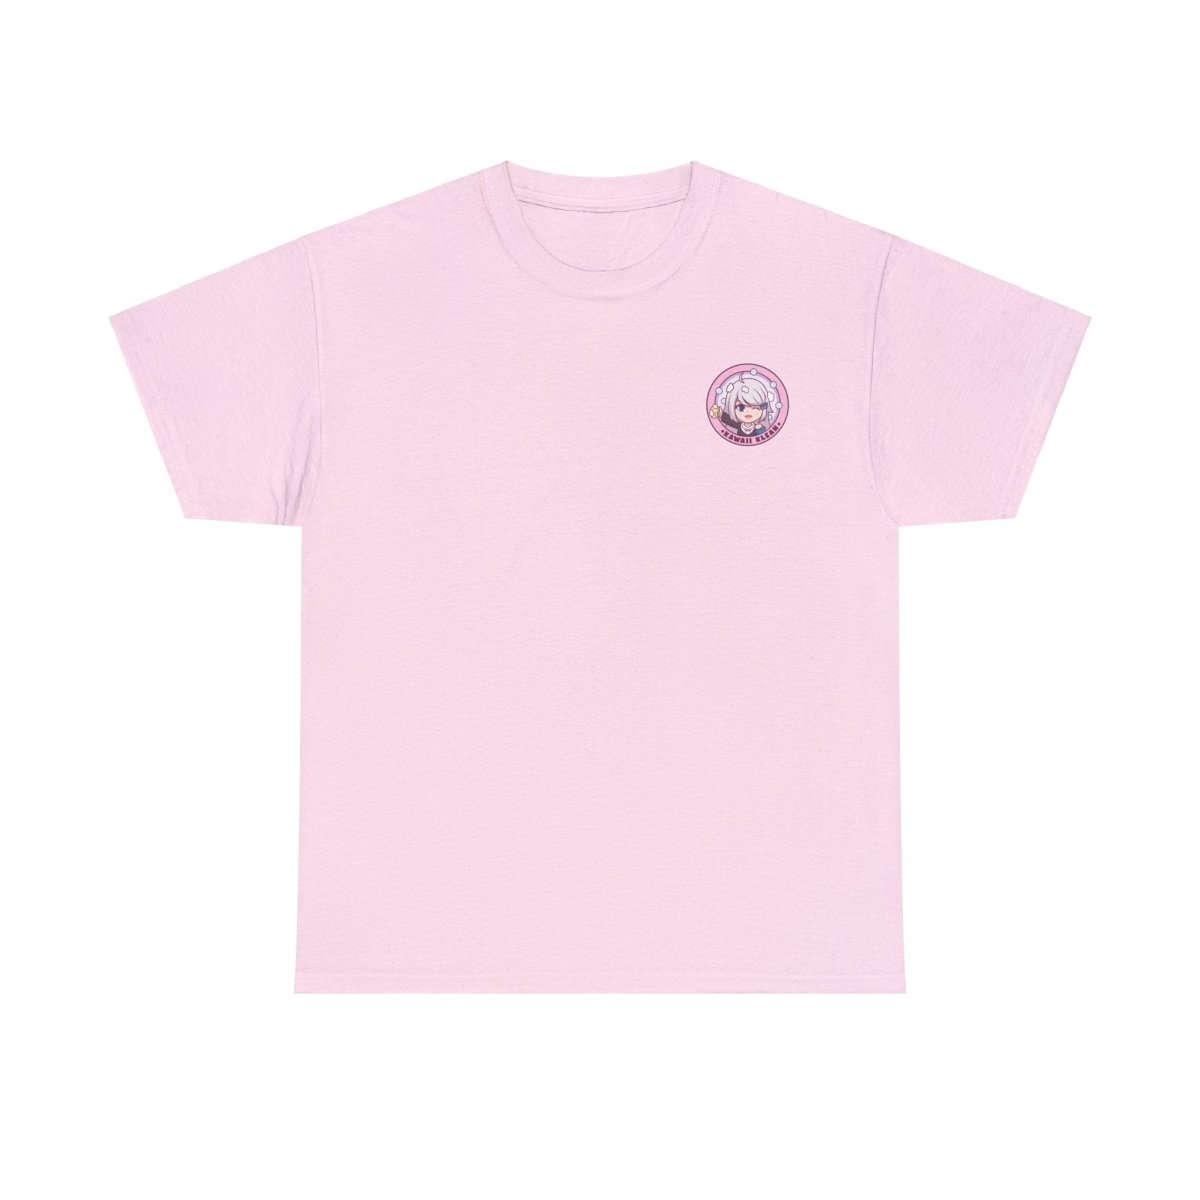 Close-up of the front of a pink T-shirt with a pink 'Kawaii Klean' logo on the left chest, focusing on the subtle yet impactful logo design on the matching background.